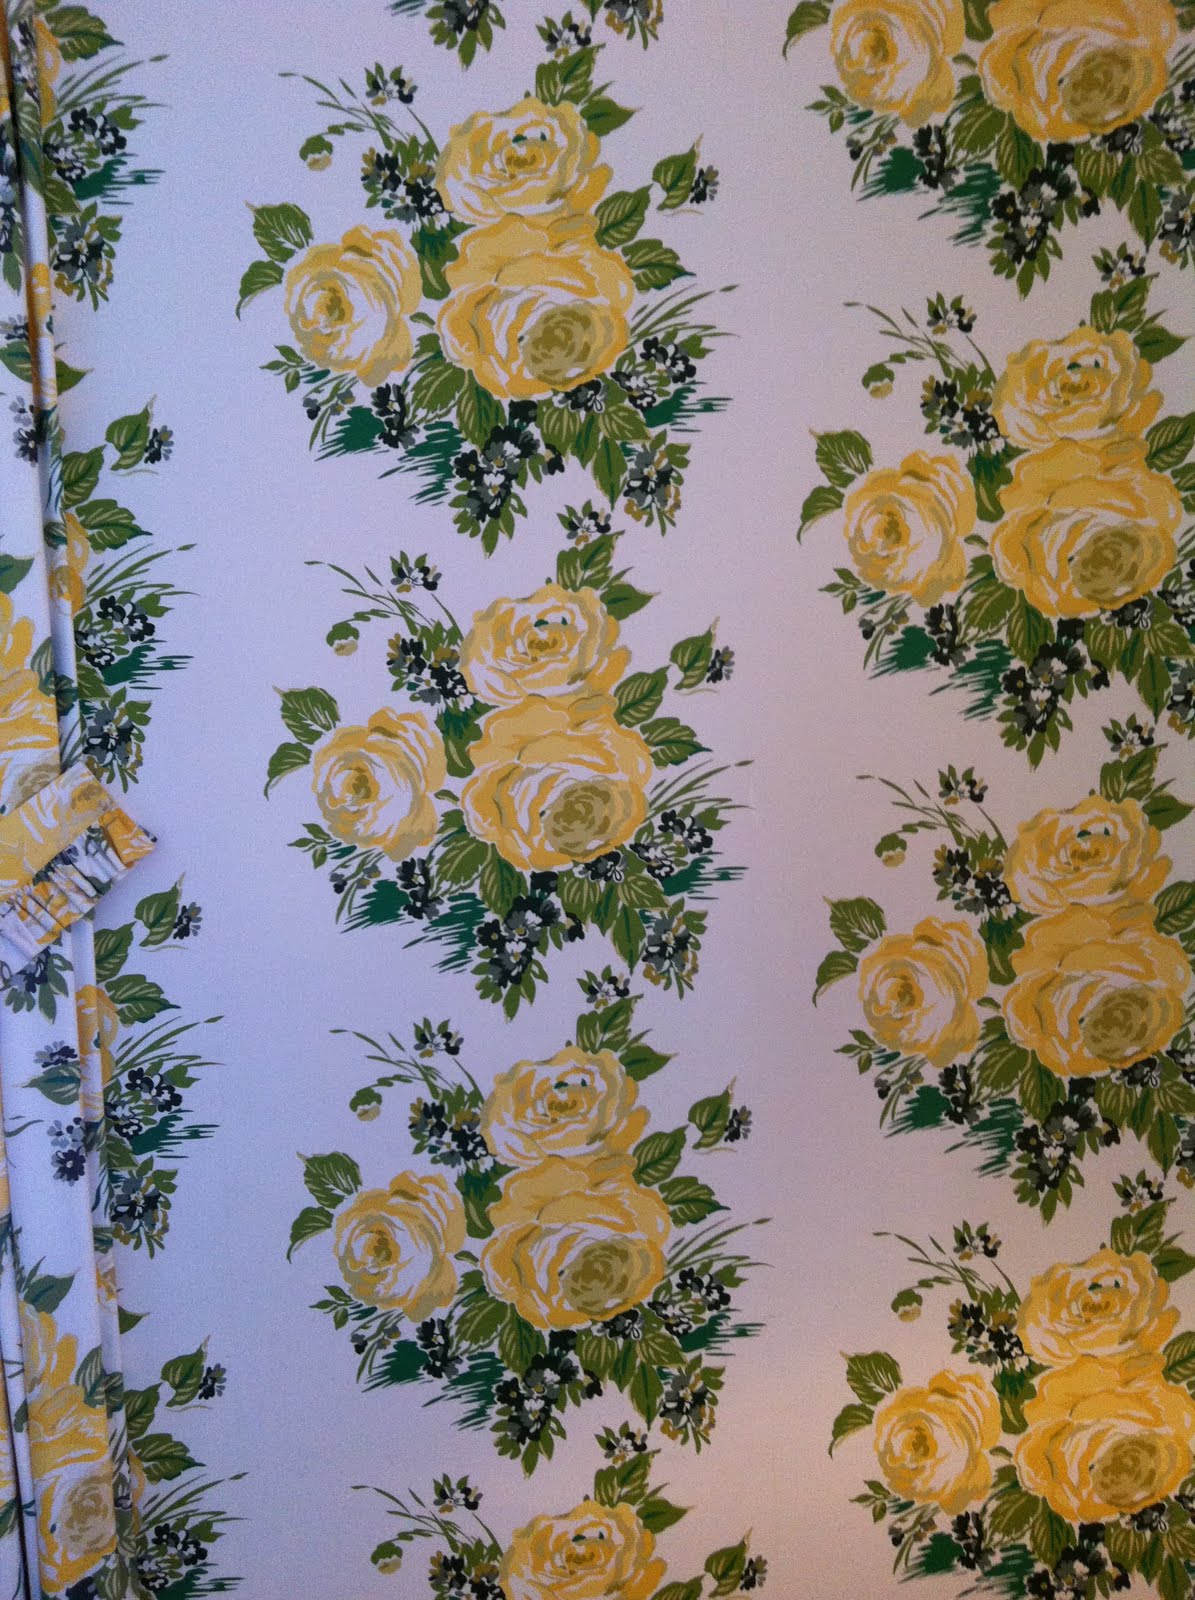 Rincess Grace Rose Wallpaper By Carleton Varney In Our Hotel Bedroom